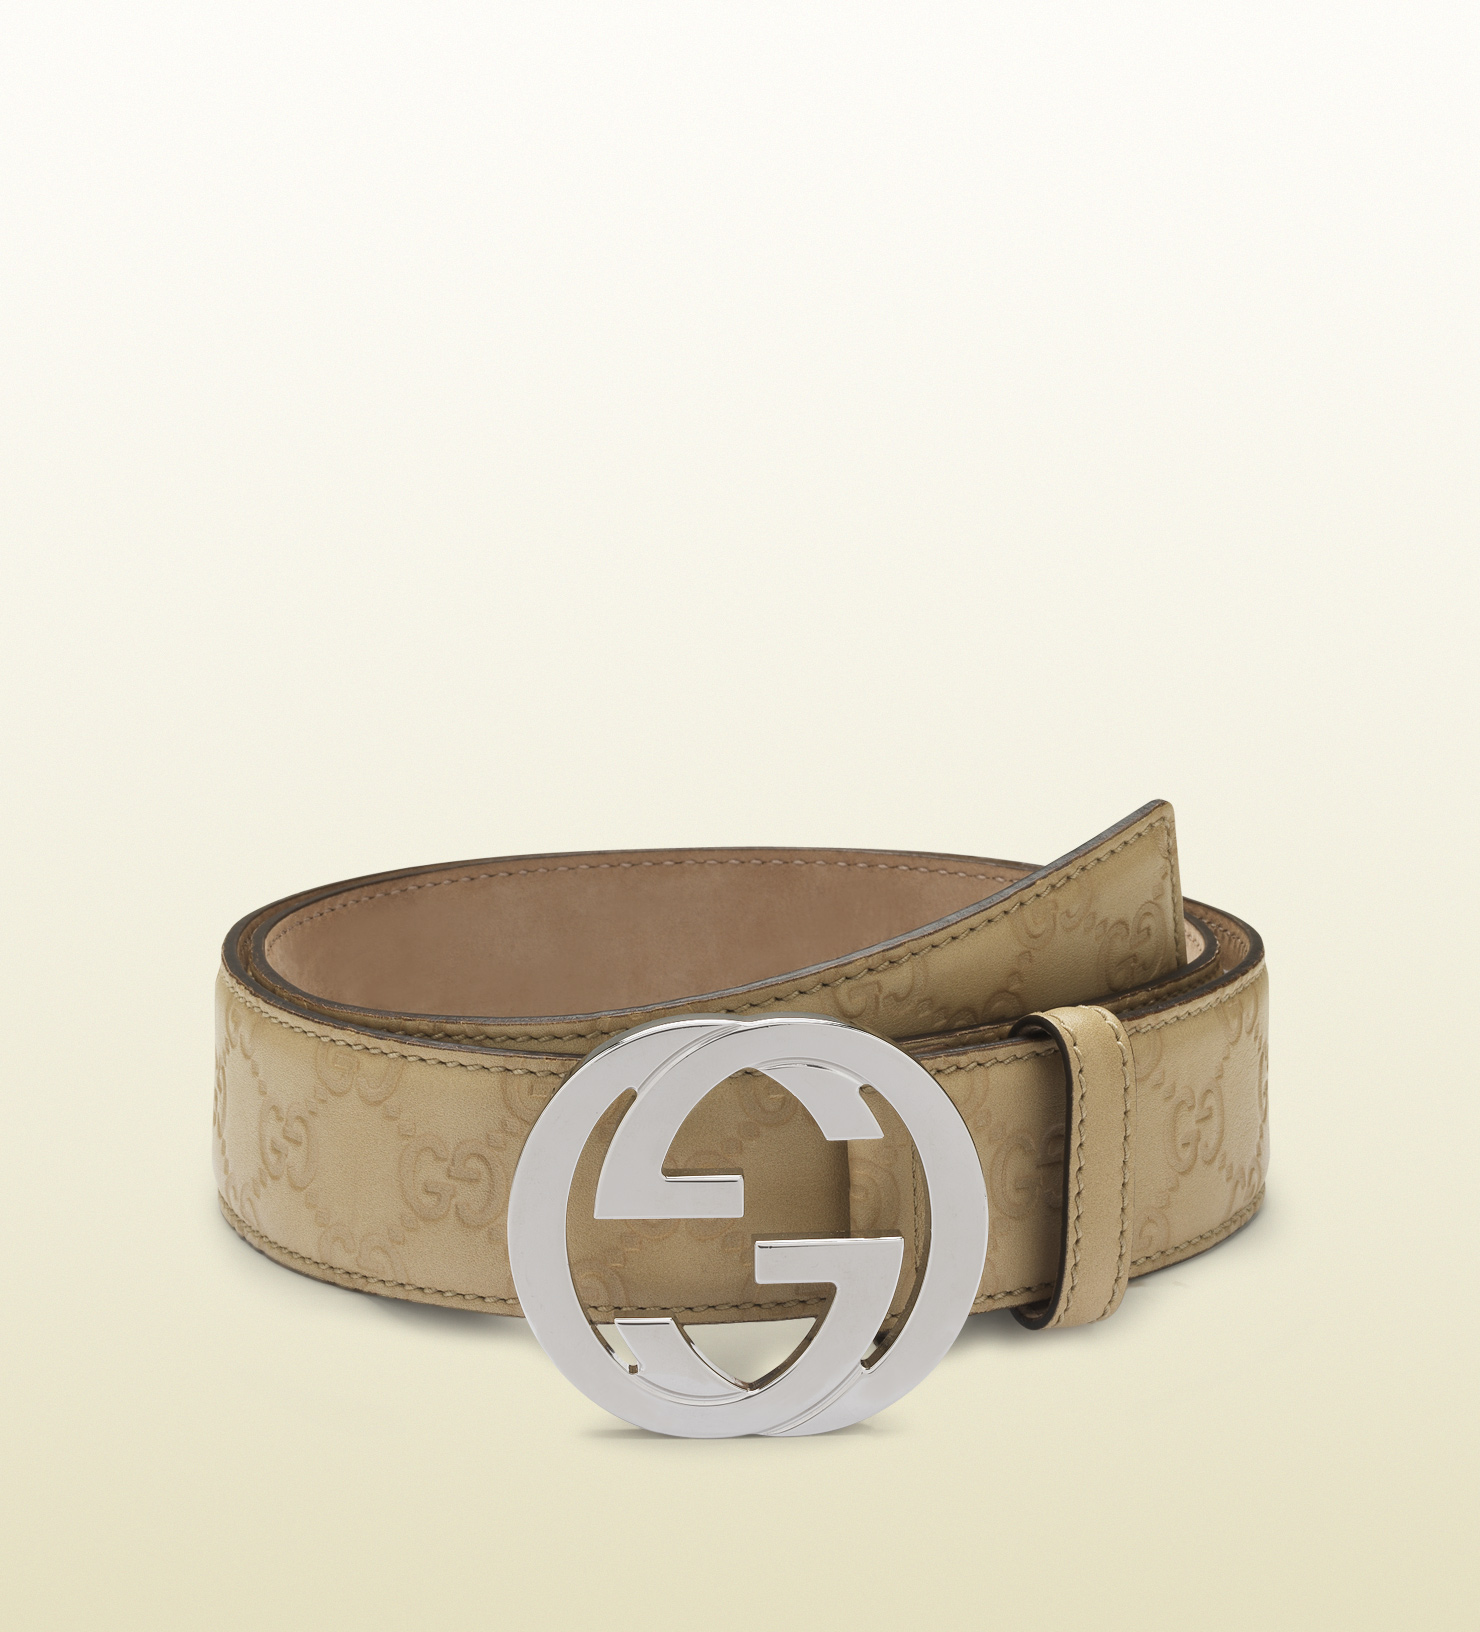 Gucci Cream Guccissima Leather Belt with Interlocking G Buckle in Natural - Lyst